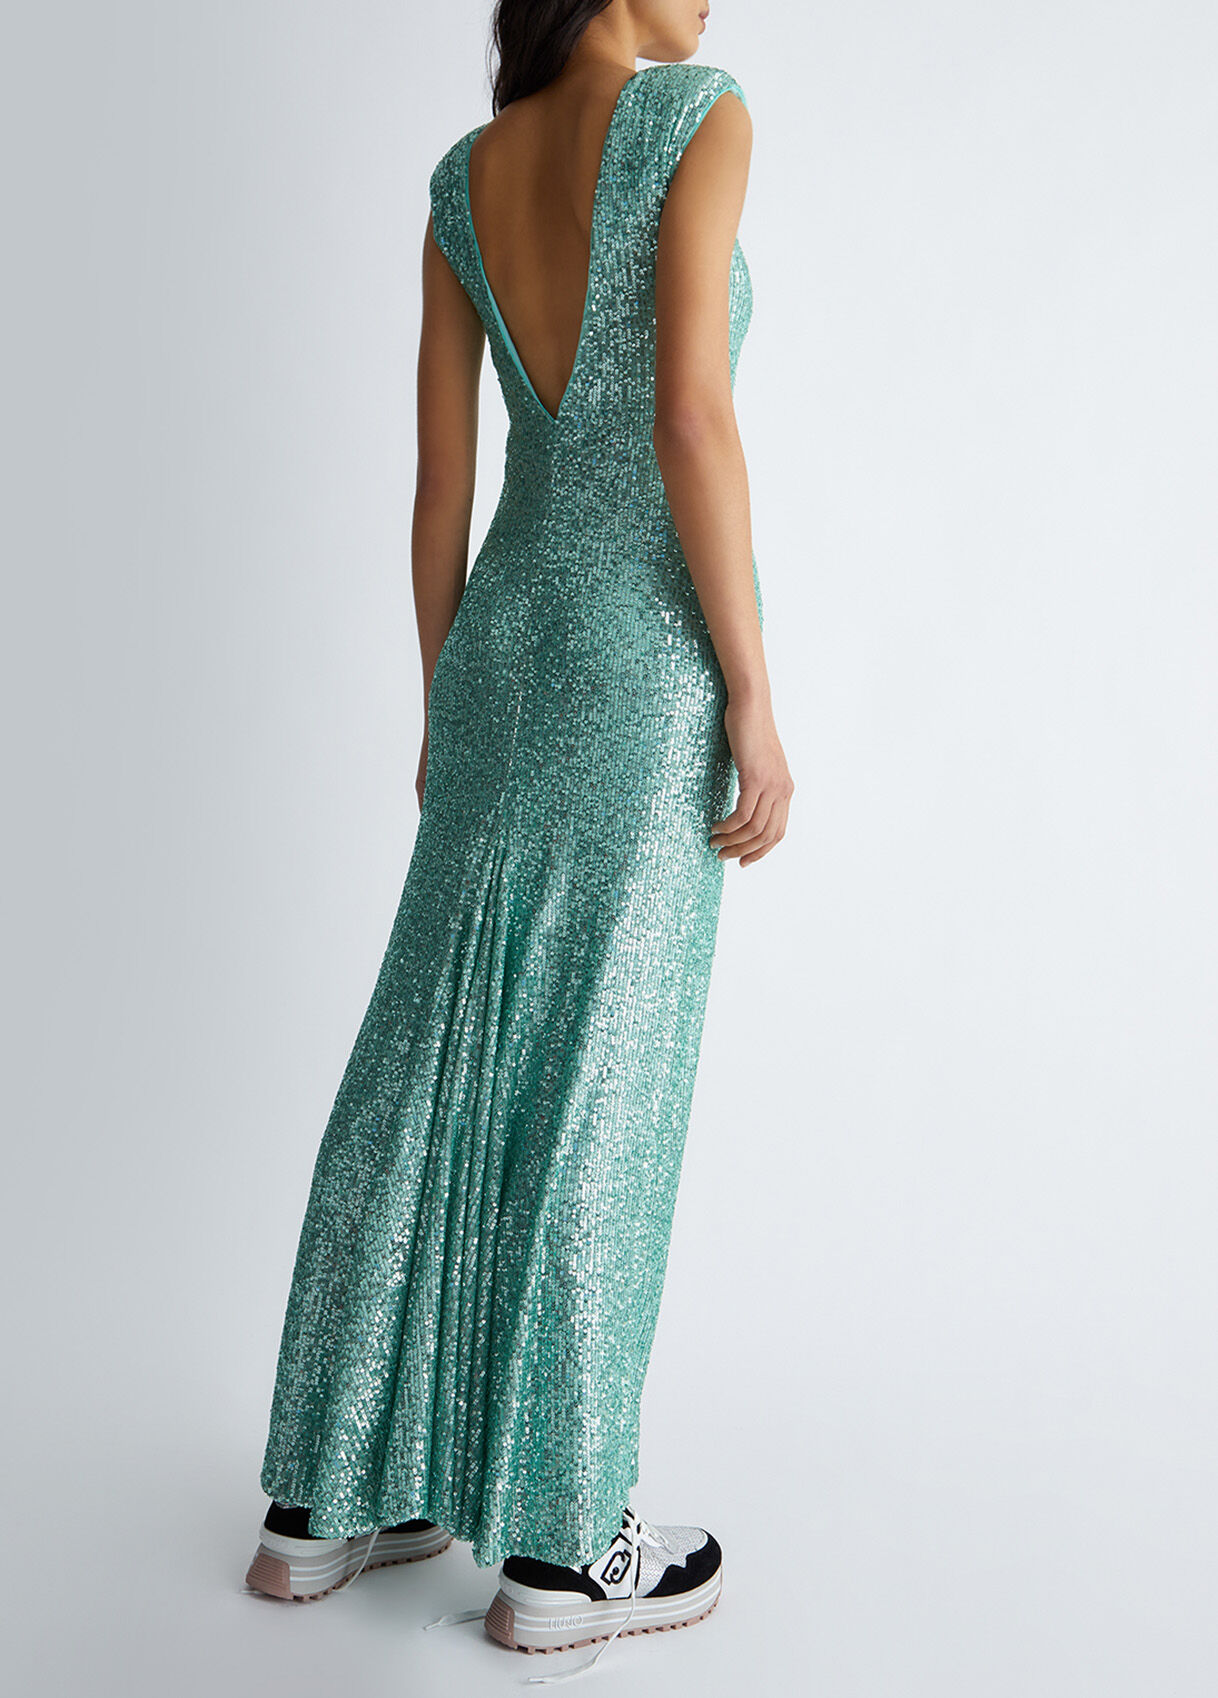 N R1308 - One Shoulder Printed Iridescent Sequin Fit & Flare Prom Gown –  Diggz Formals